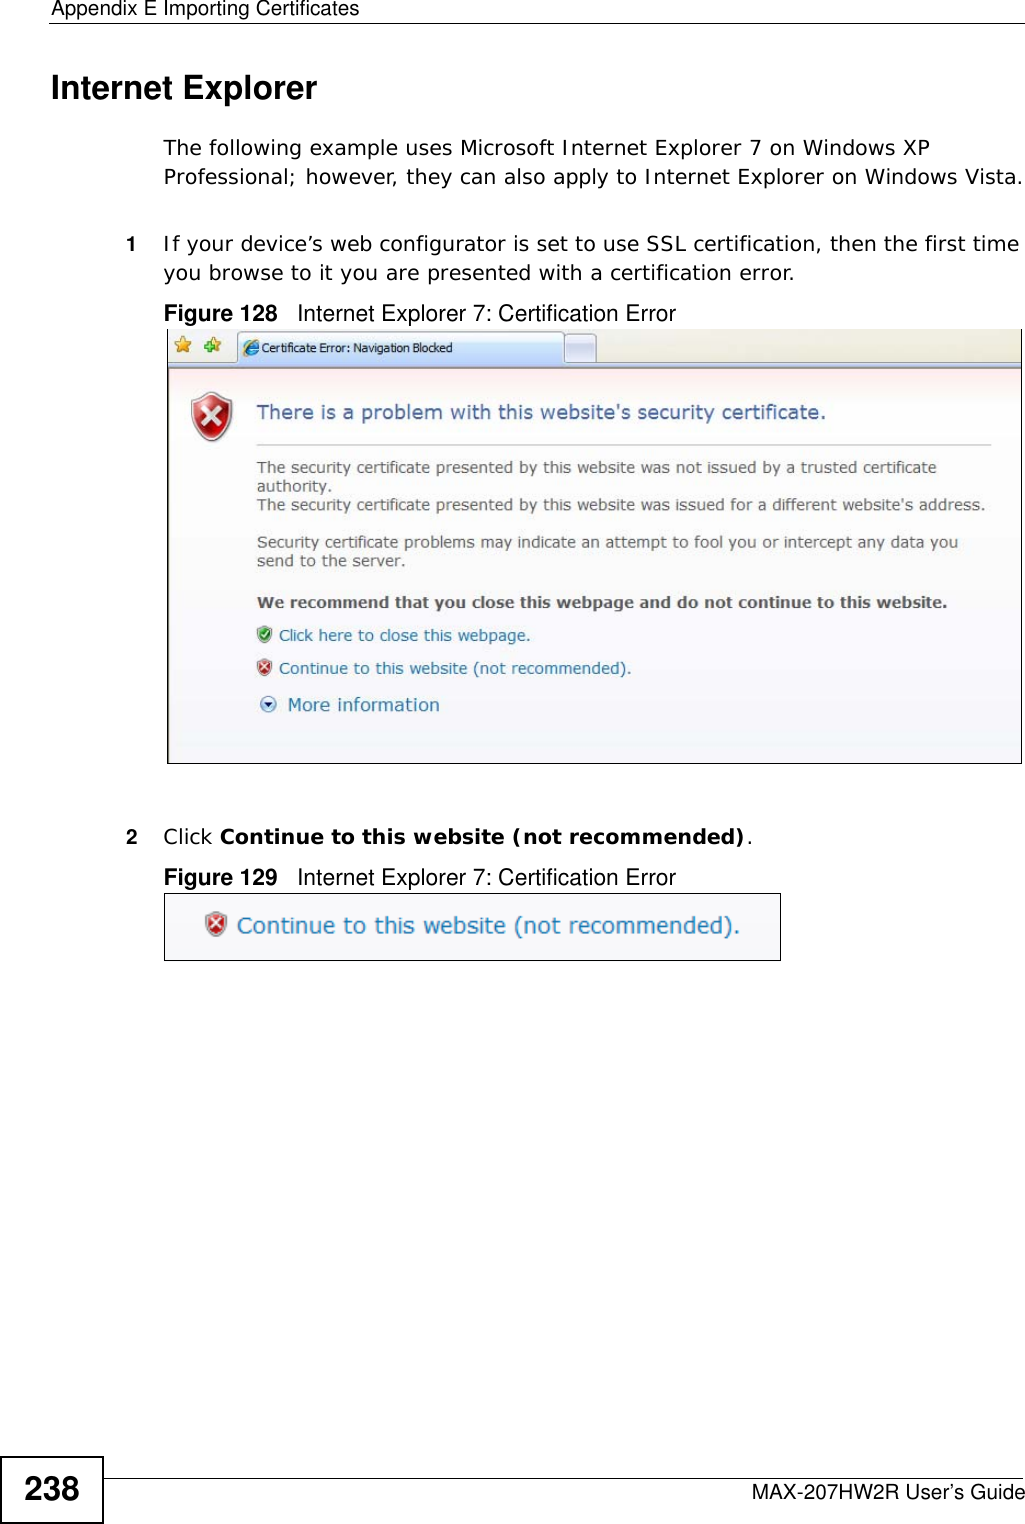 Appendix E Importing CertificatesMAX-207HW2R User’s Guide238Internet ExplorerThe following example uses Microsoft Internet Explorer 7 on Windows XP Professional; however, they can also apply to Internet Explorer on Windows Vista.1If your device’s web configurator is set to use SSL certification, then the first time you browse to it you are presented with a certification error.Figure 128   Internet Explorer 7: Certification Error2Click Continue to this website (not recommended).Figure 129   Internet Explorer 7: Certification Error